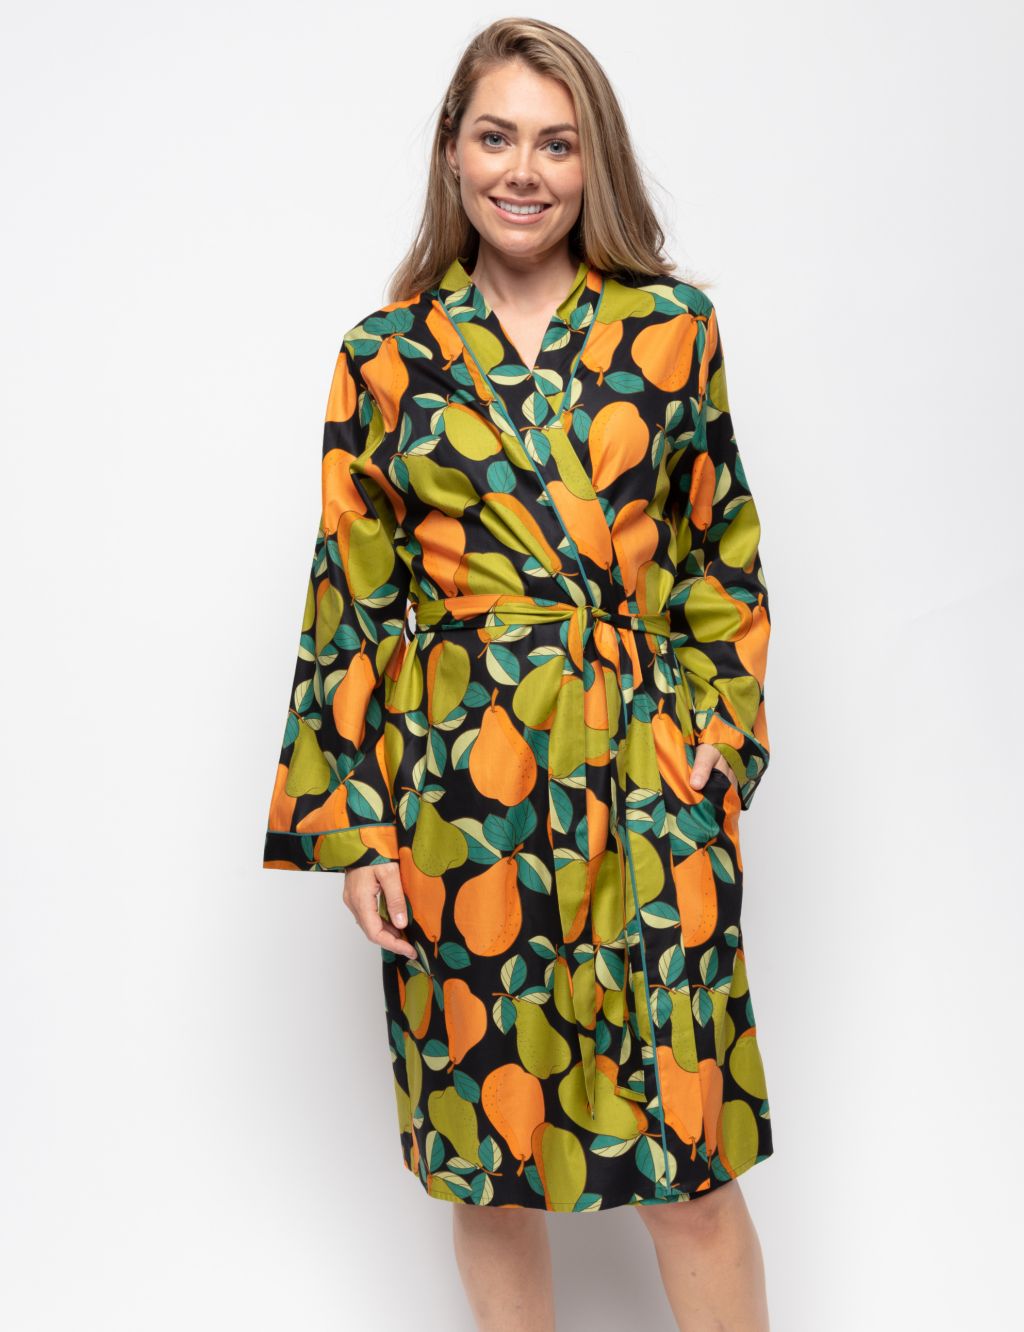 Cotton Modal Pear Print Short Dressing Gown image 1